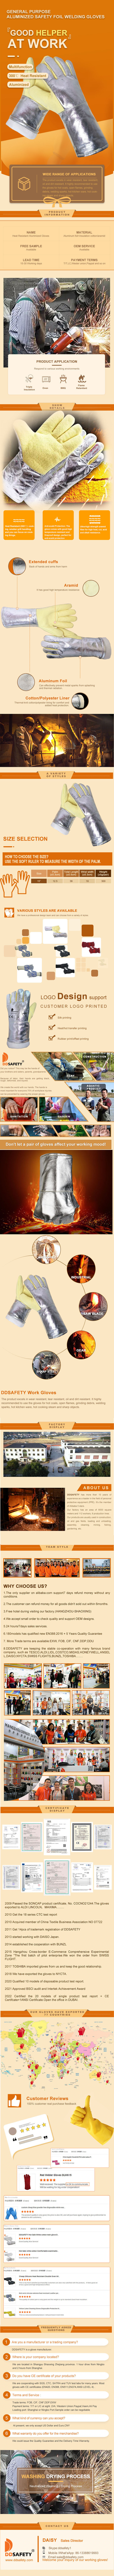 High Temp Radiation and  Heat Resistant Welding gloves Aluminized Welding Glove/Large - DAF451 High Temp Radiation and  Heat Resistant Welding gloves Aluminized Welding Glove/Large - DAF451 Heat Resistant gloves,Aluminized Foil Safety Welding Work Gloves,Heat Resistant Aluminized Foil Safety Welding Work Gloves